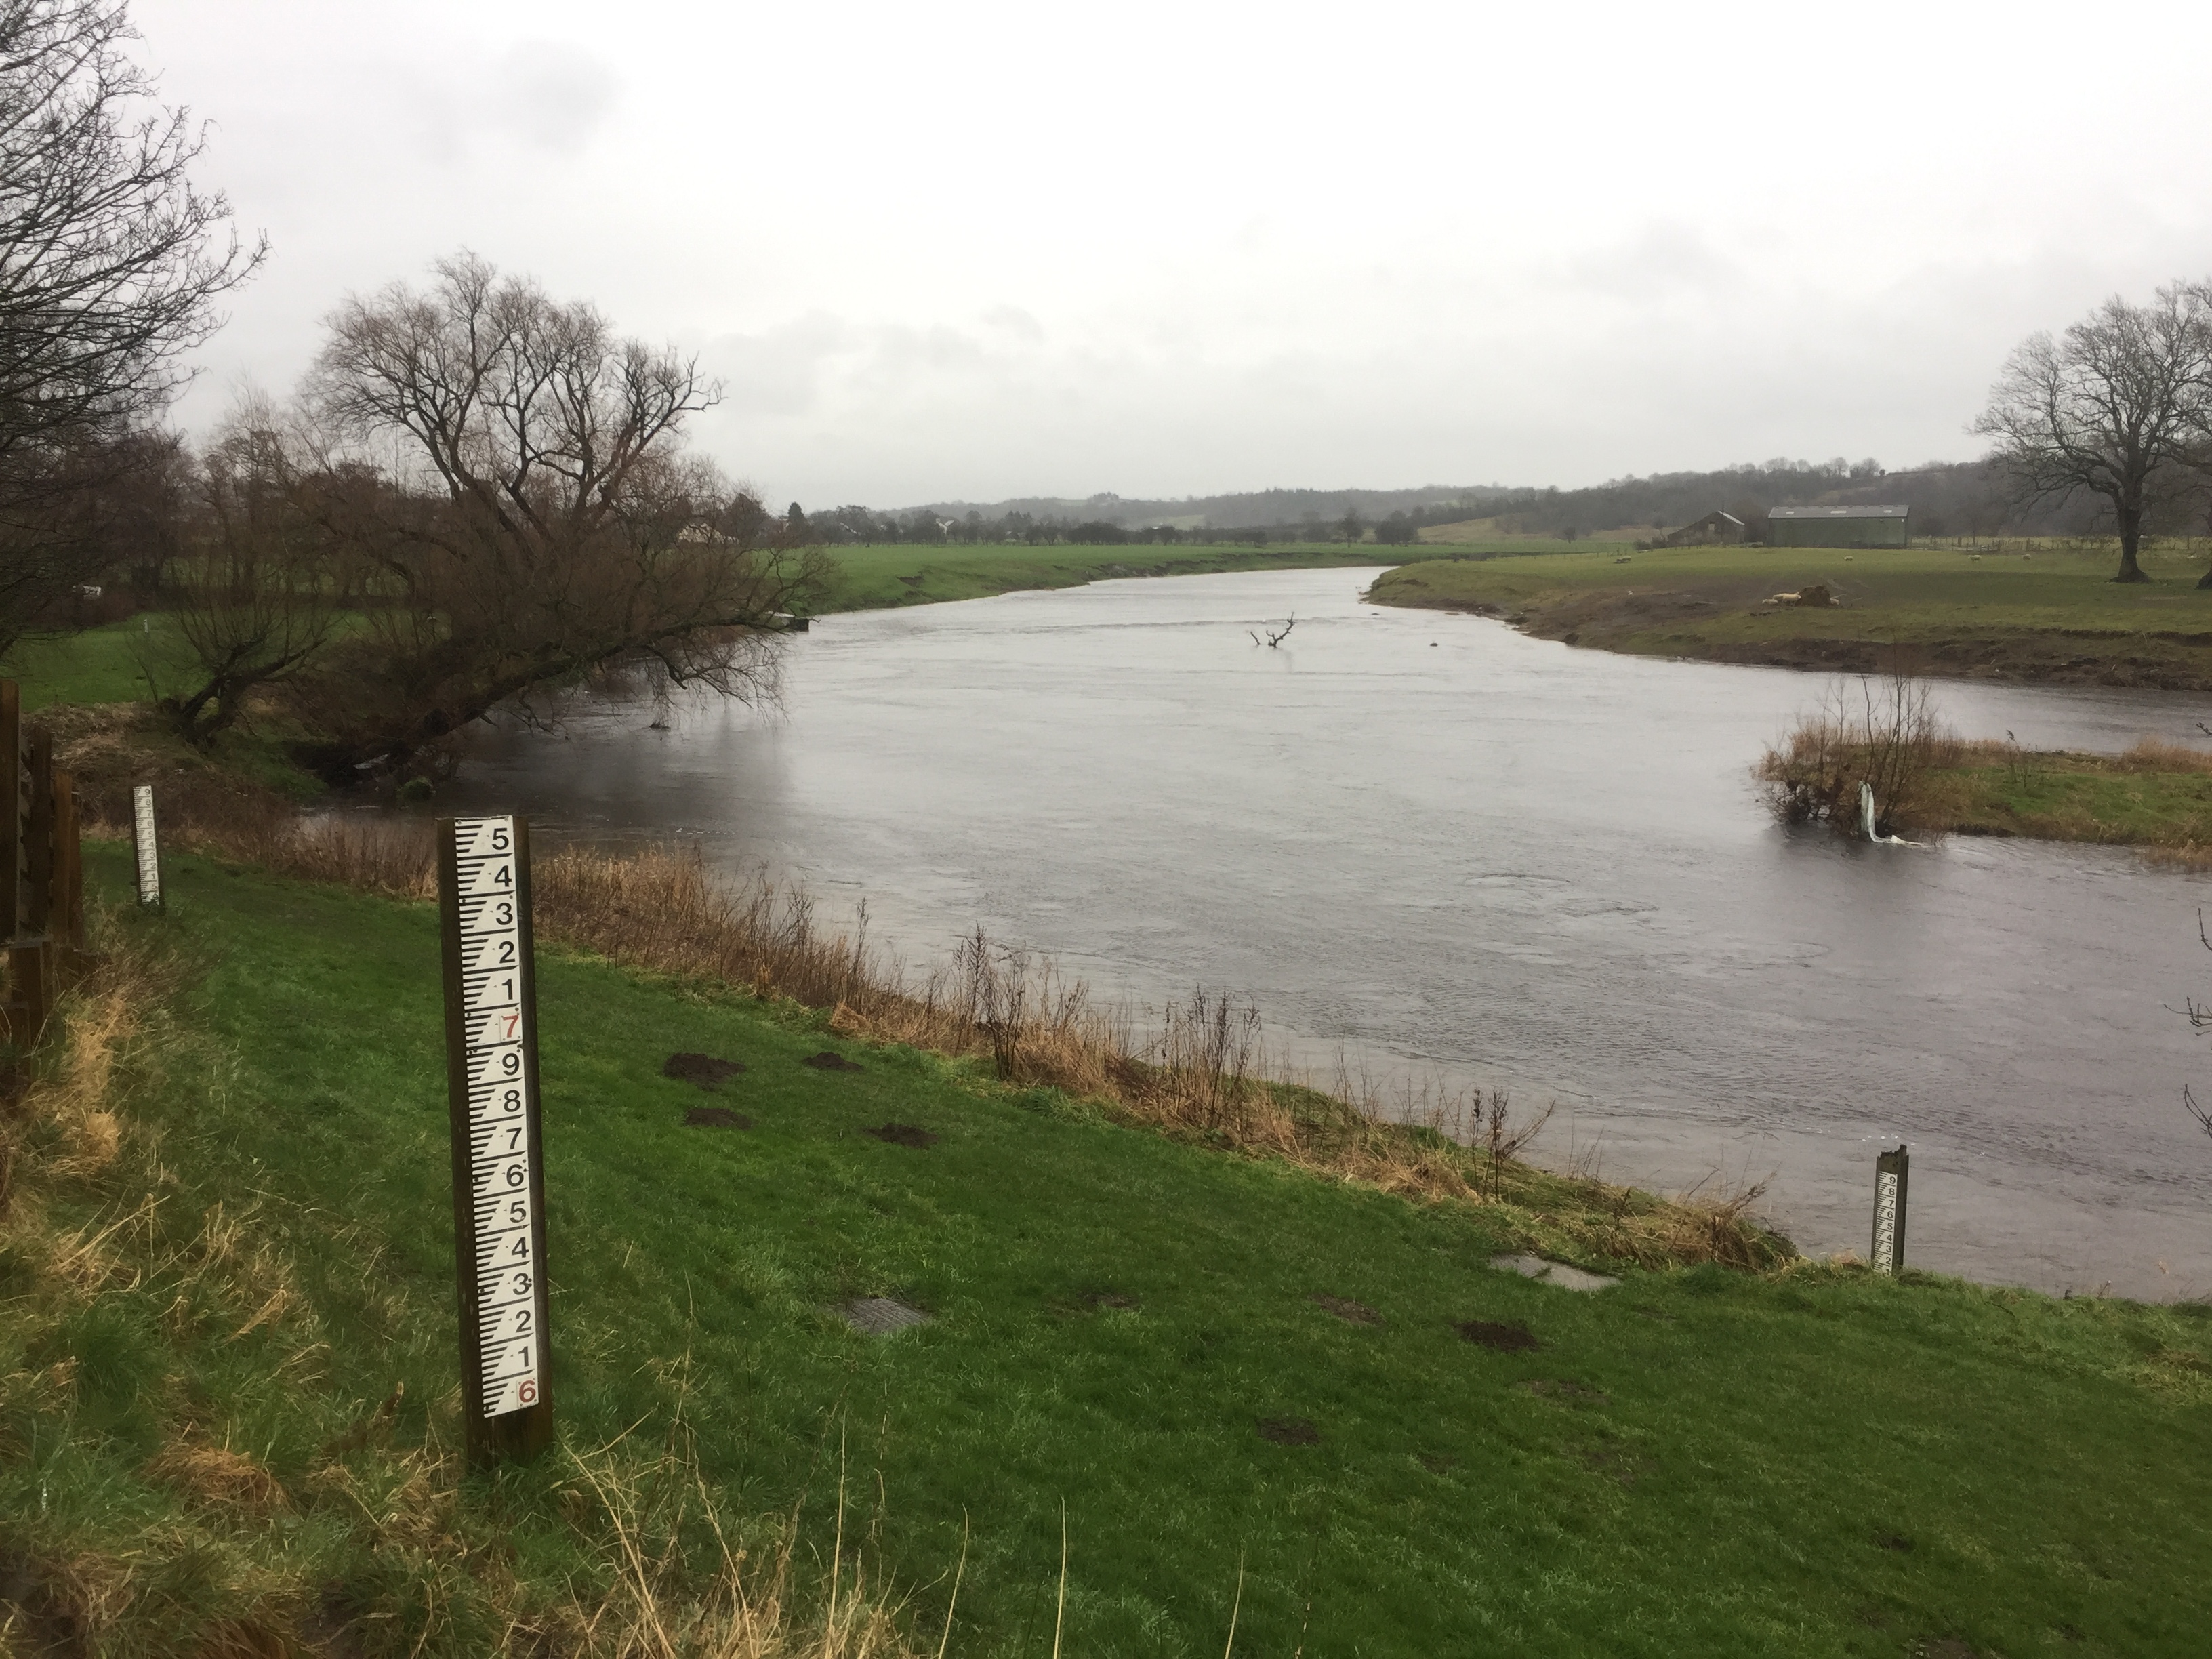 Gauge boards on the bank of the River Ribble in Ribchester, Lancashire